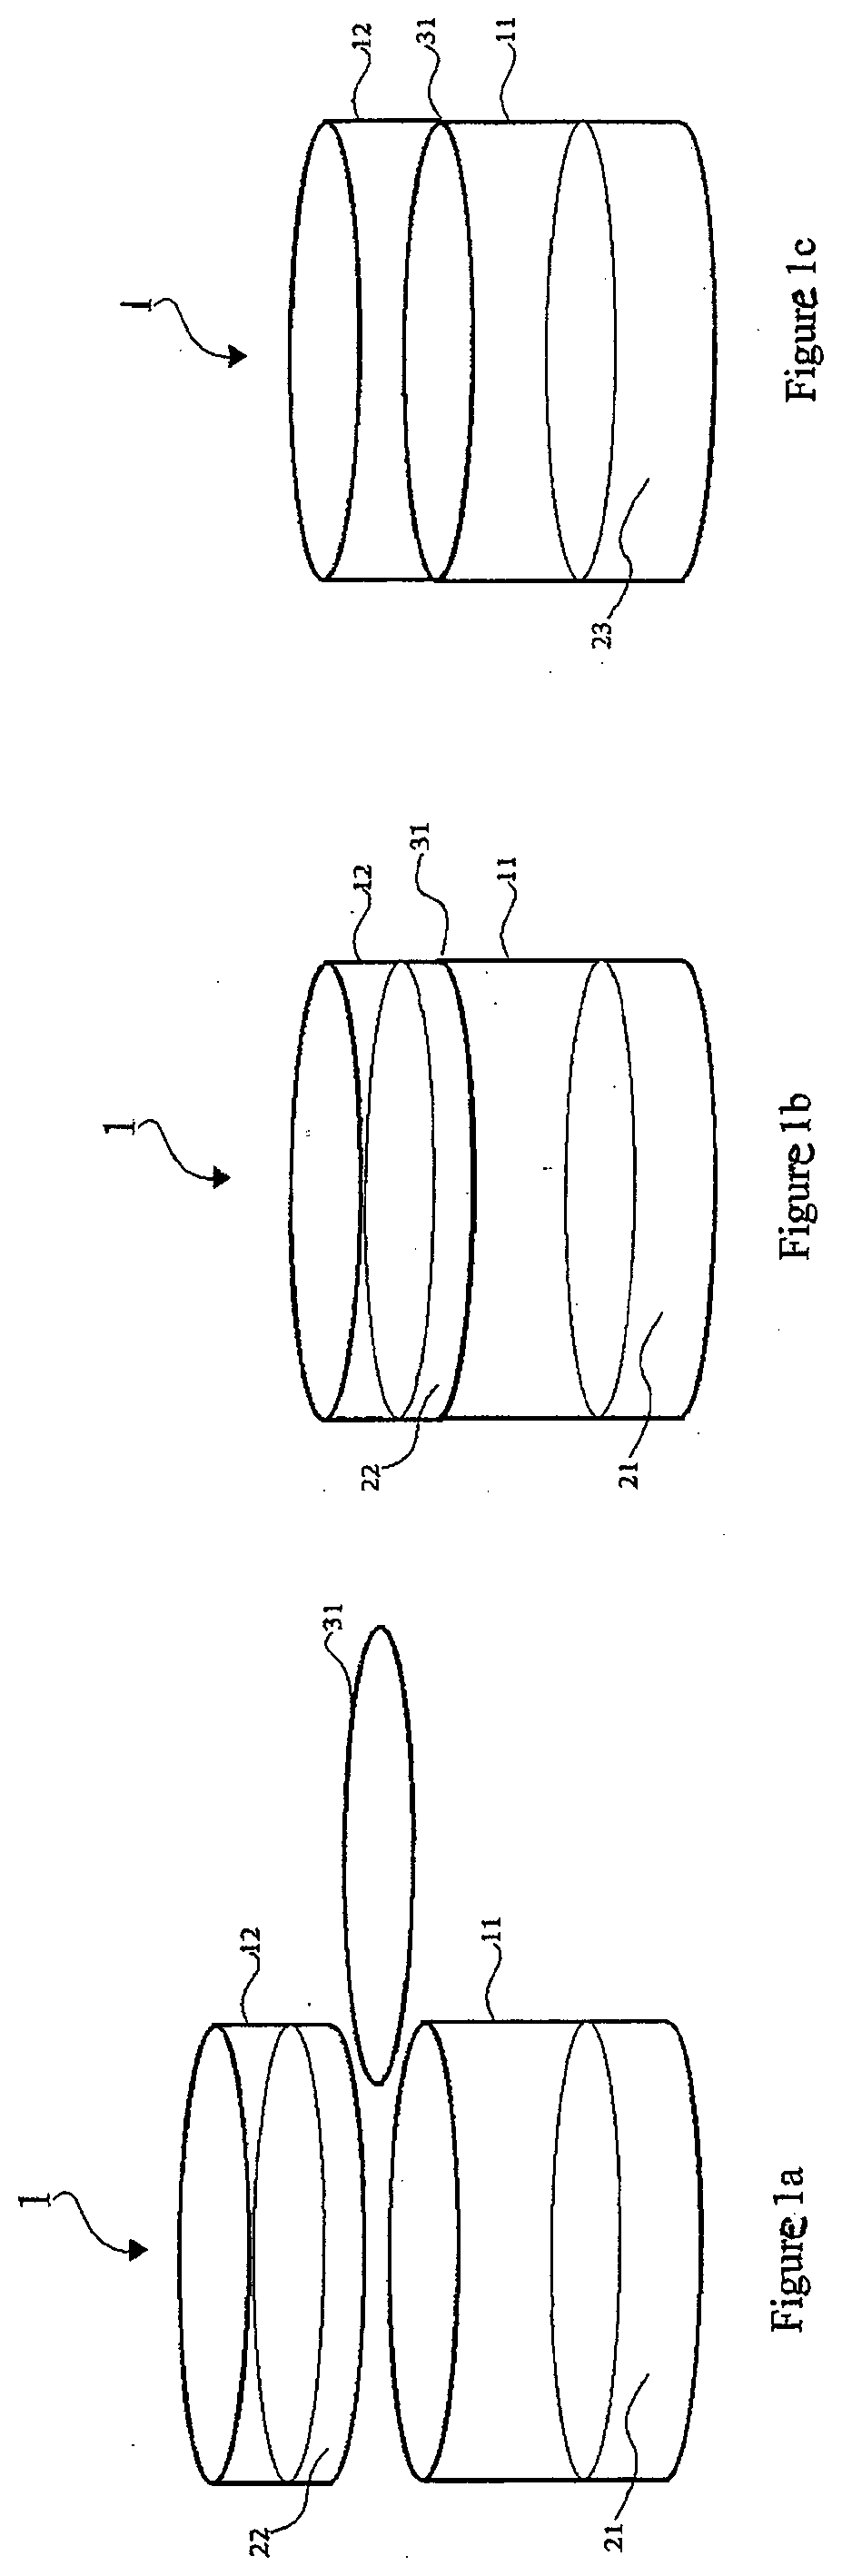 Device and method for collecting, preserving and/or transporting biological samples